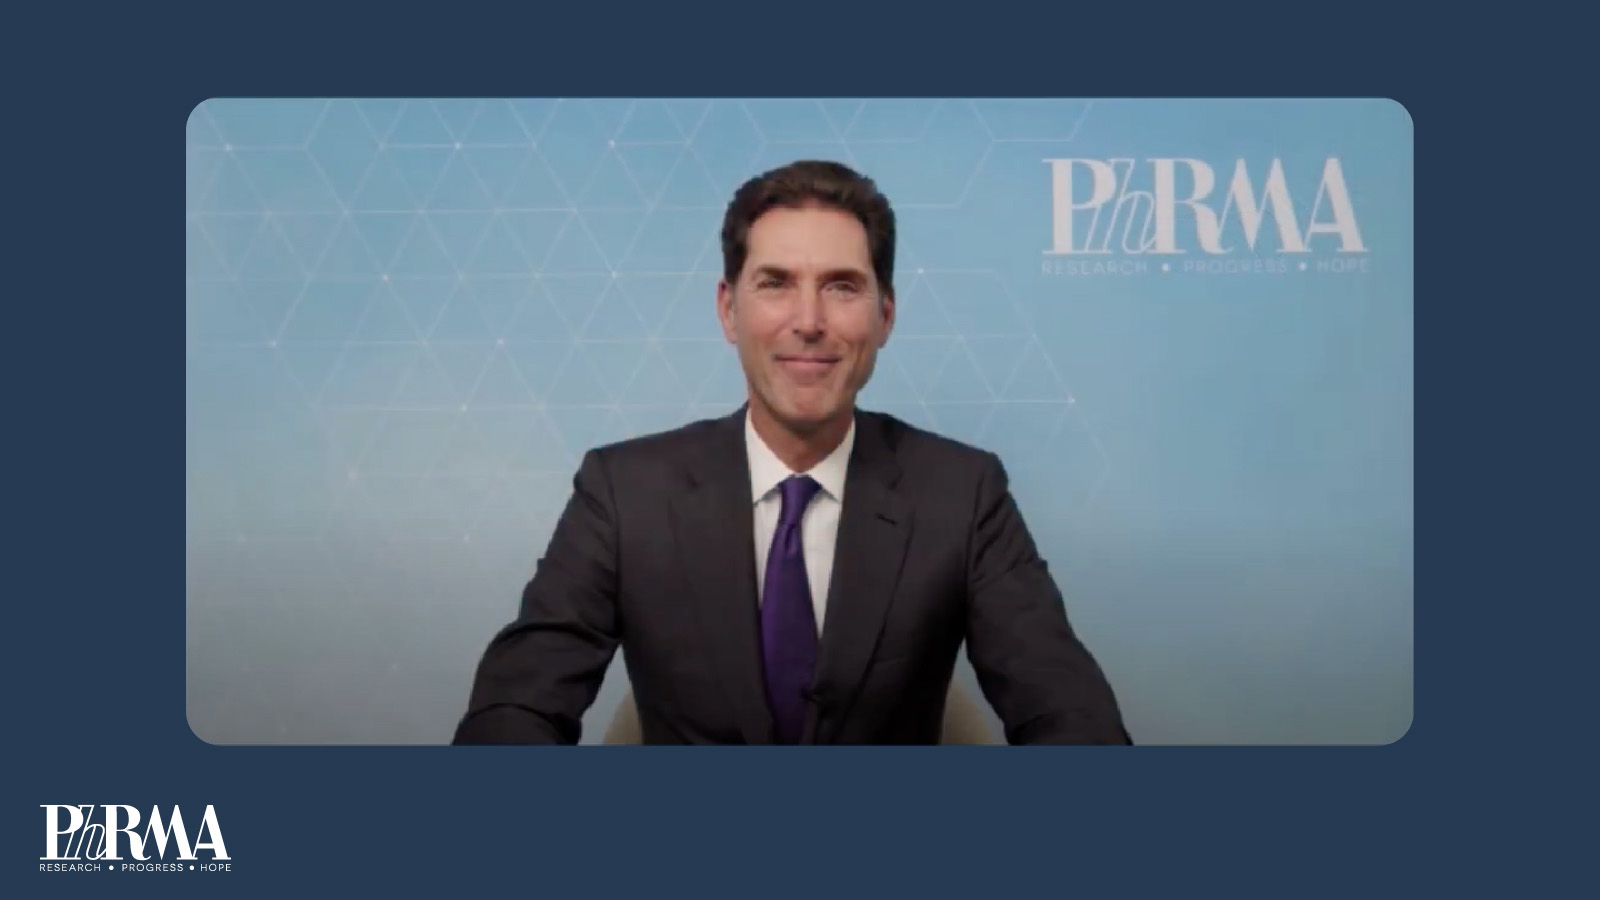 Screenshot from video of Stephen Ubl, CEO of PhRMA